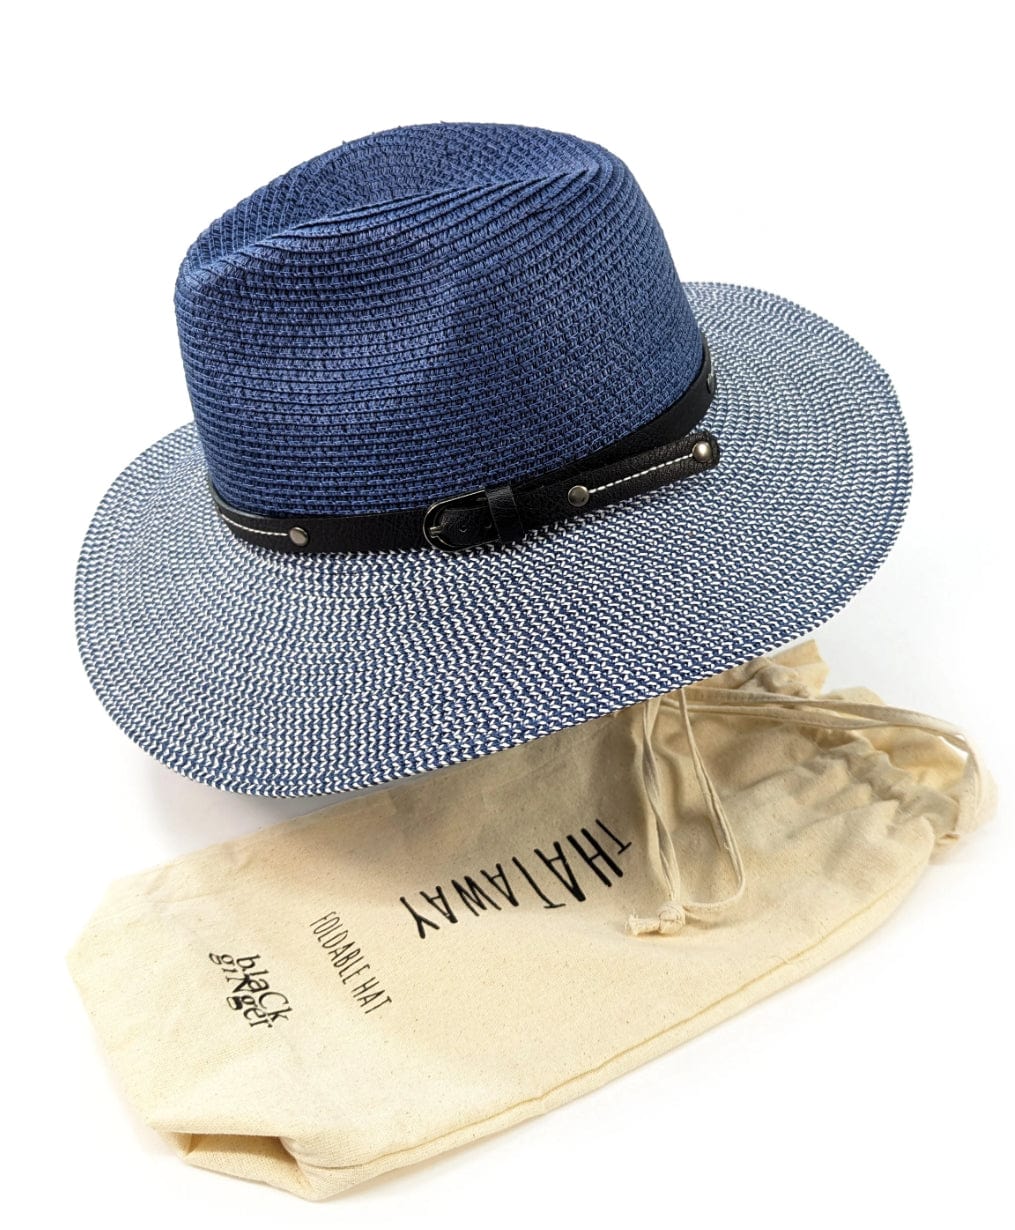 lusciousscarves Rollable Packable Panama Travel Sun Hat with Belt Design - Mottled/Navy Blue